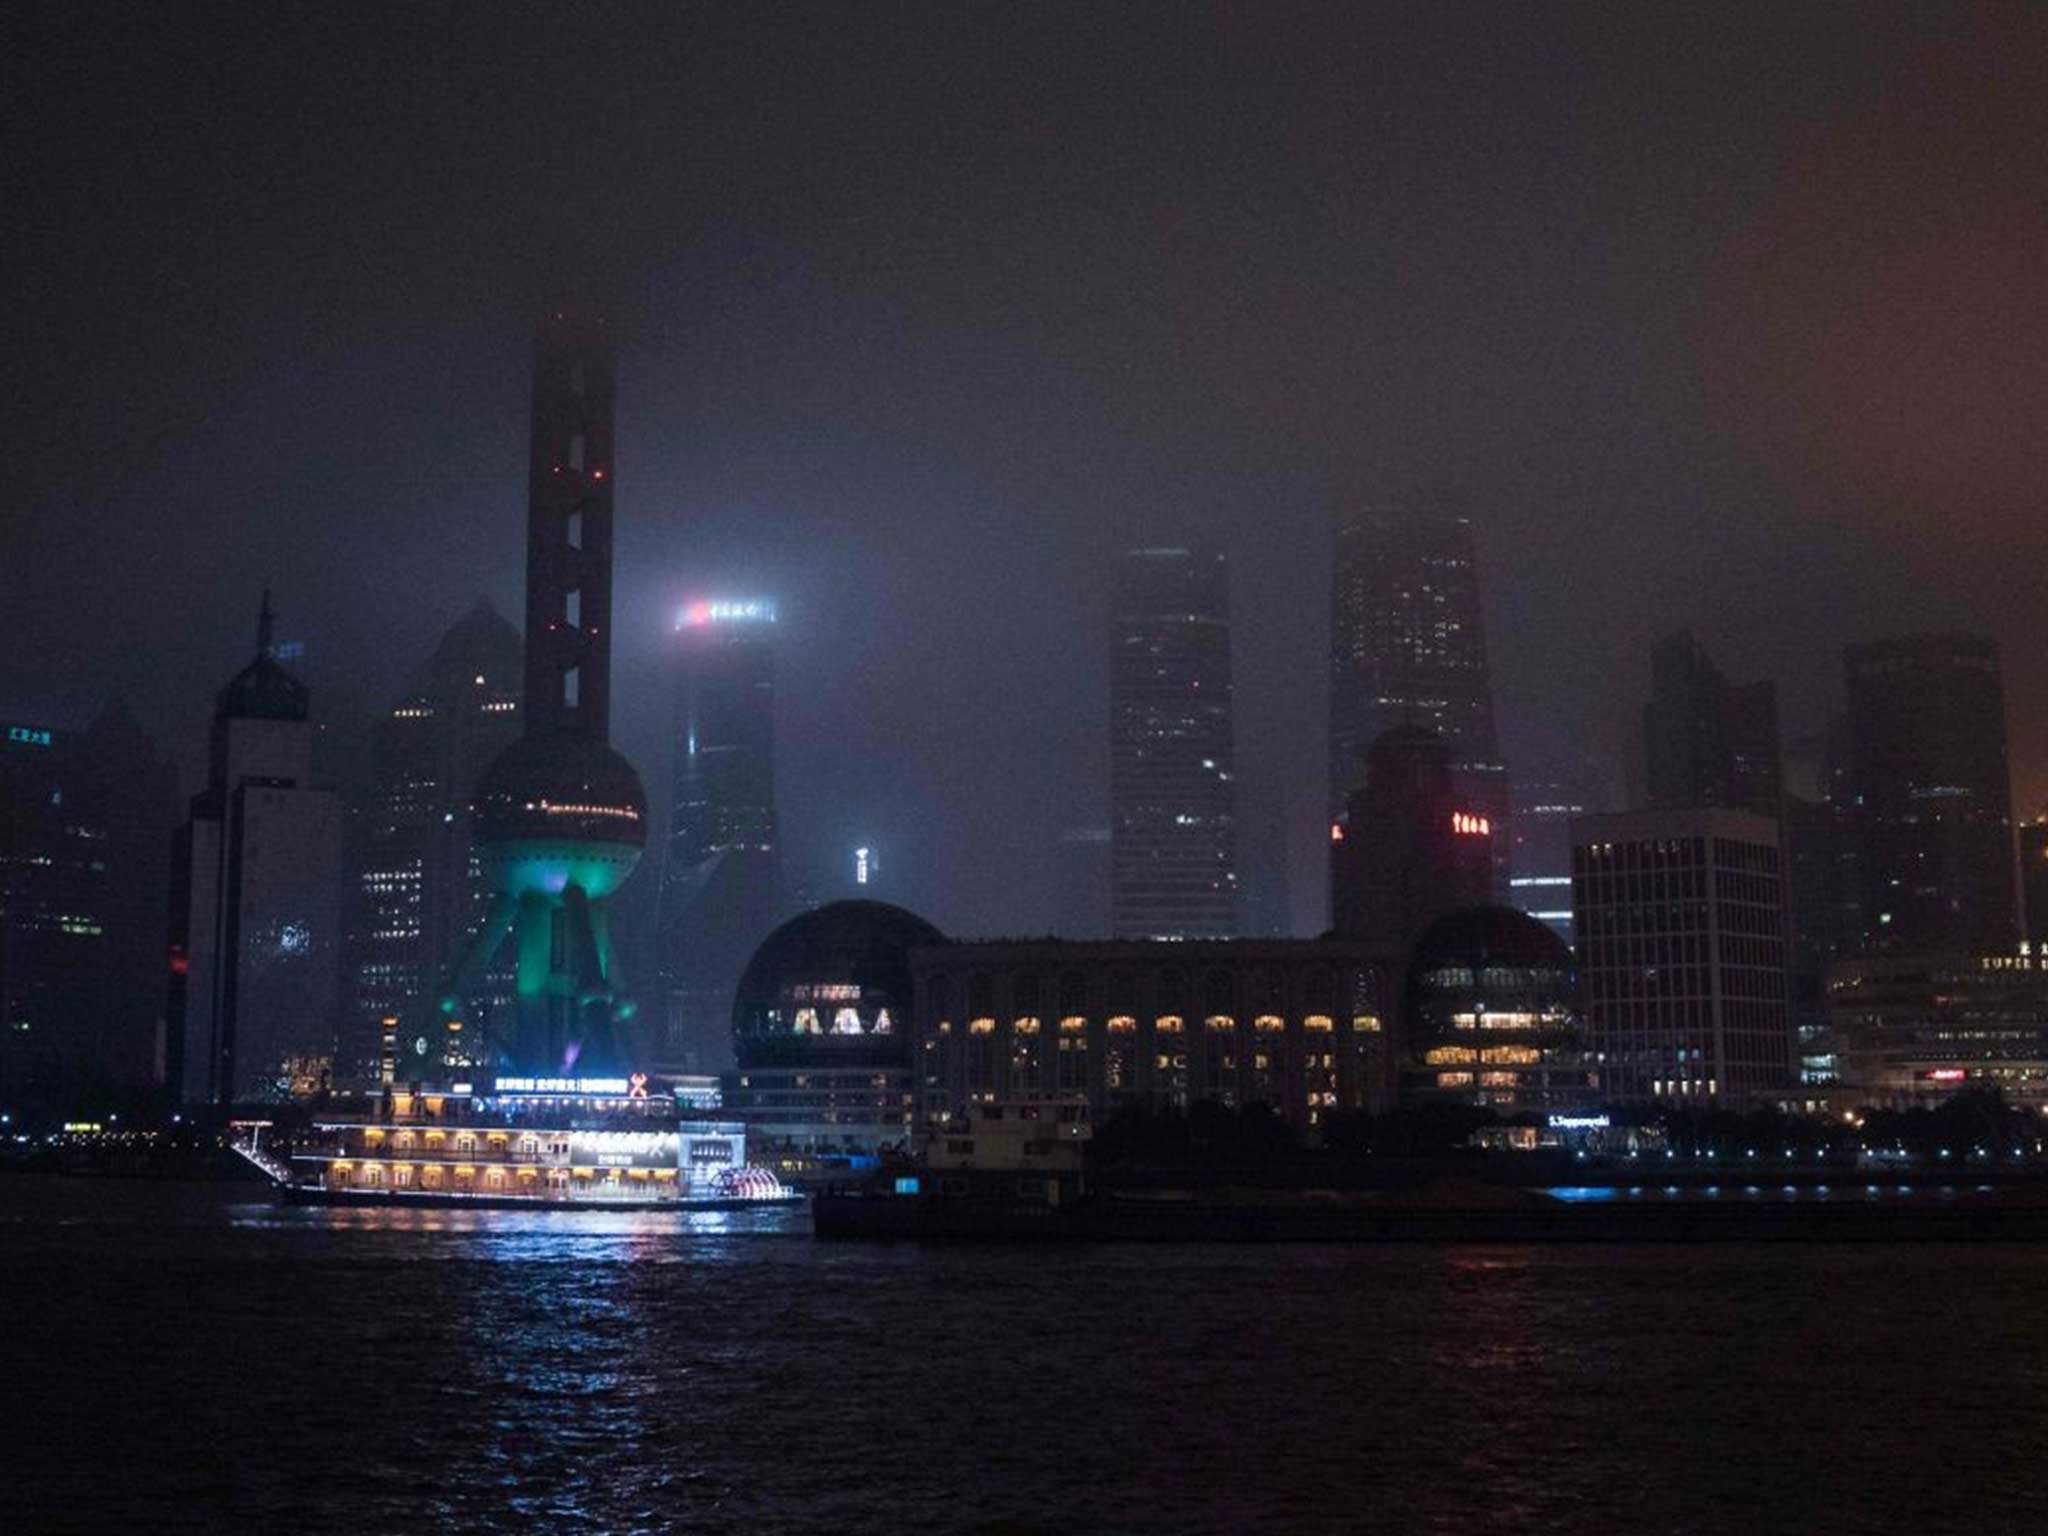 A well-lit ferry stands out from a darkened Shanghai skyline during Earth Hour 2016